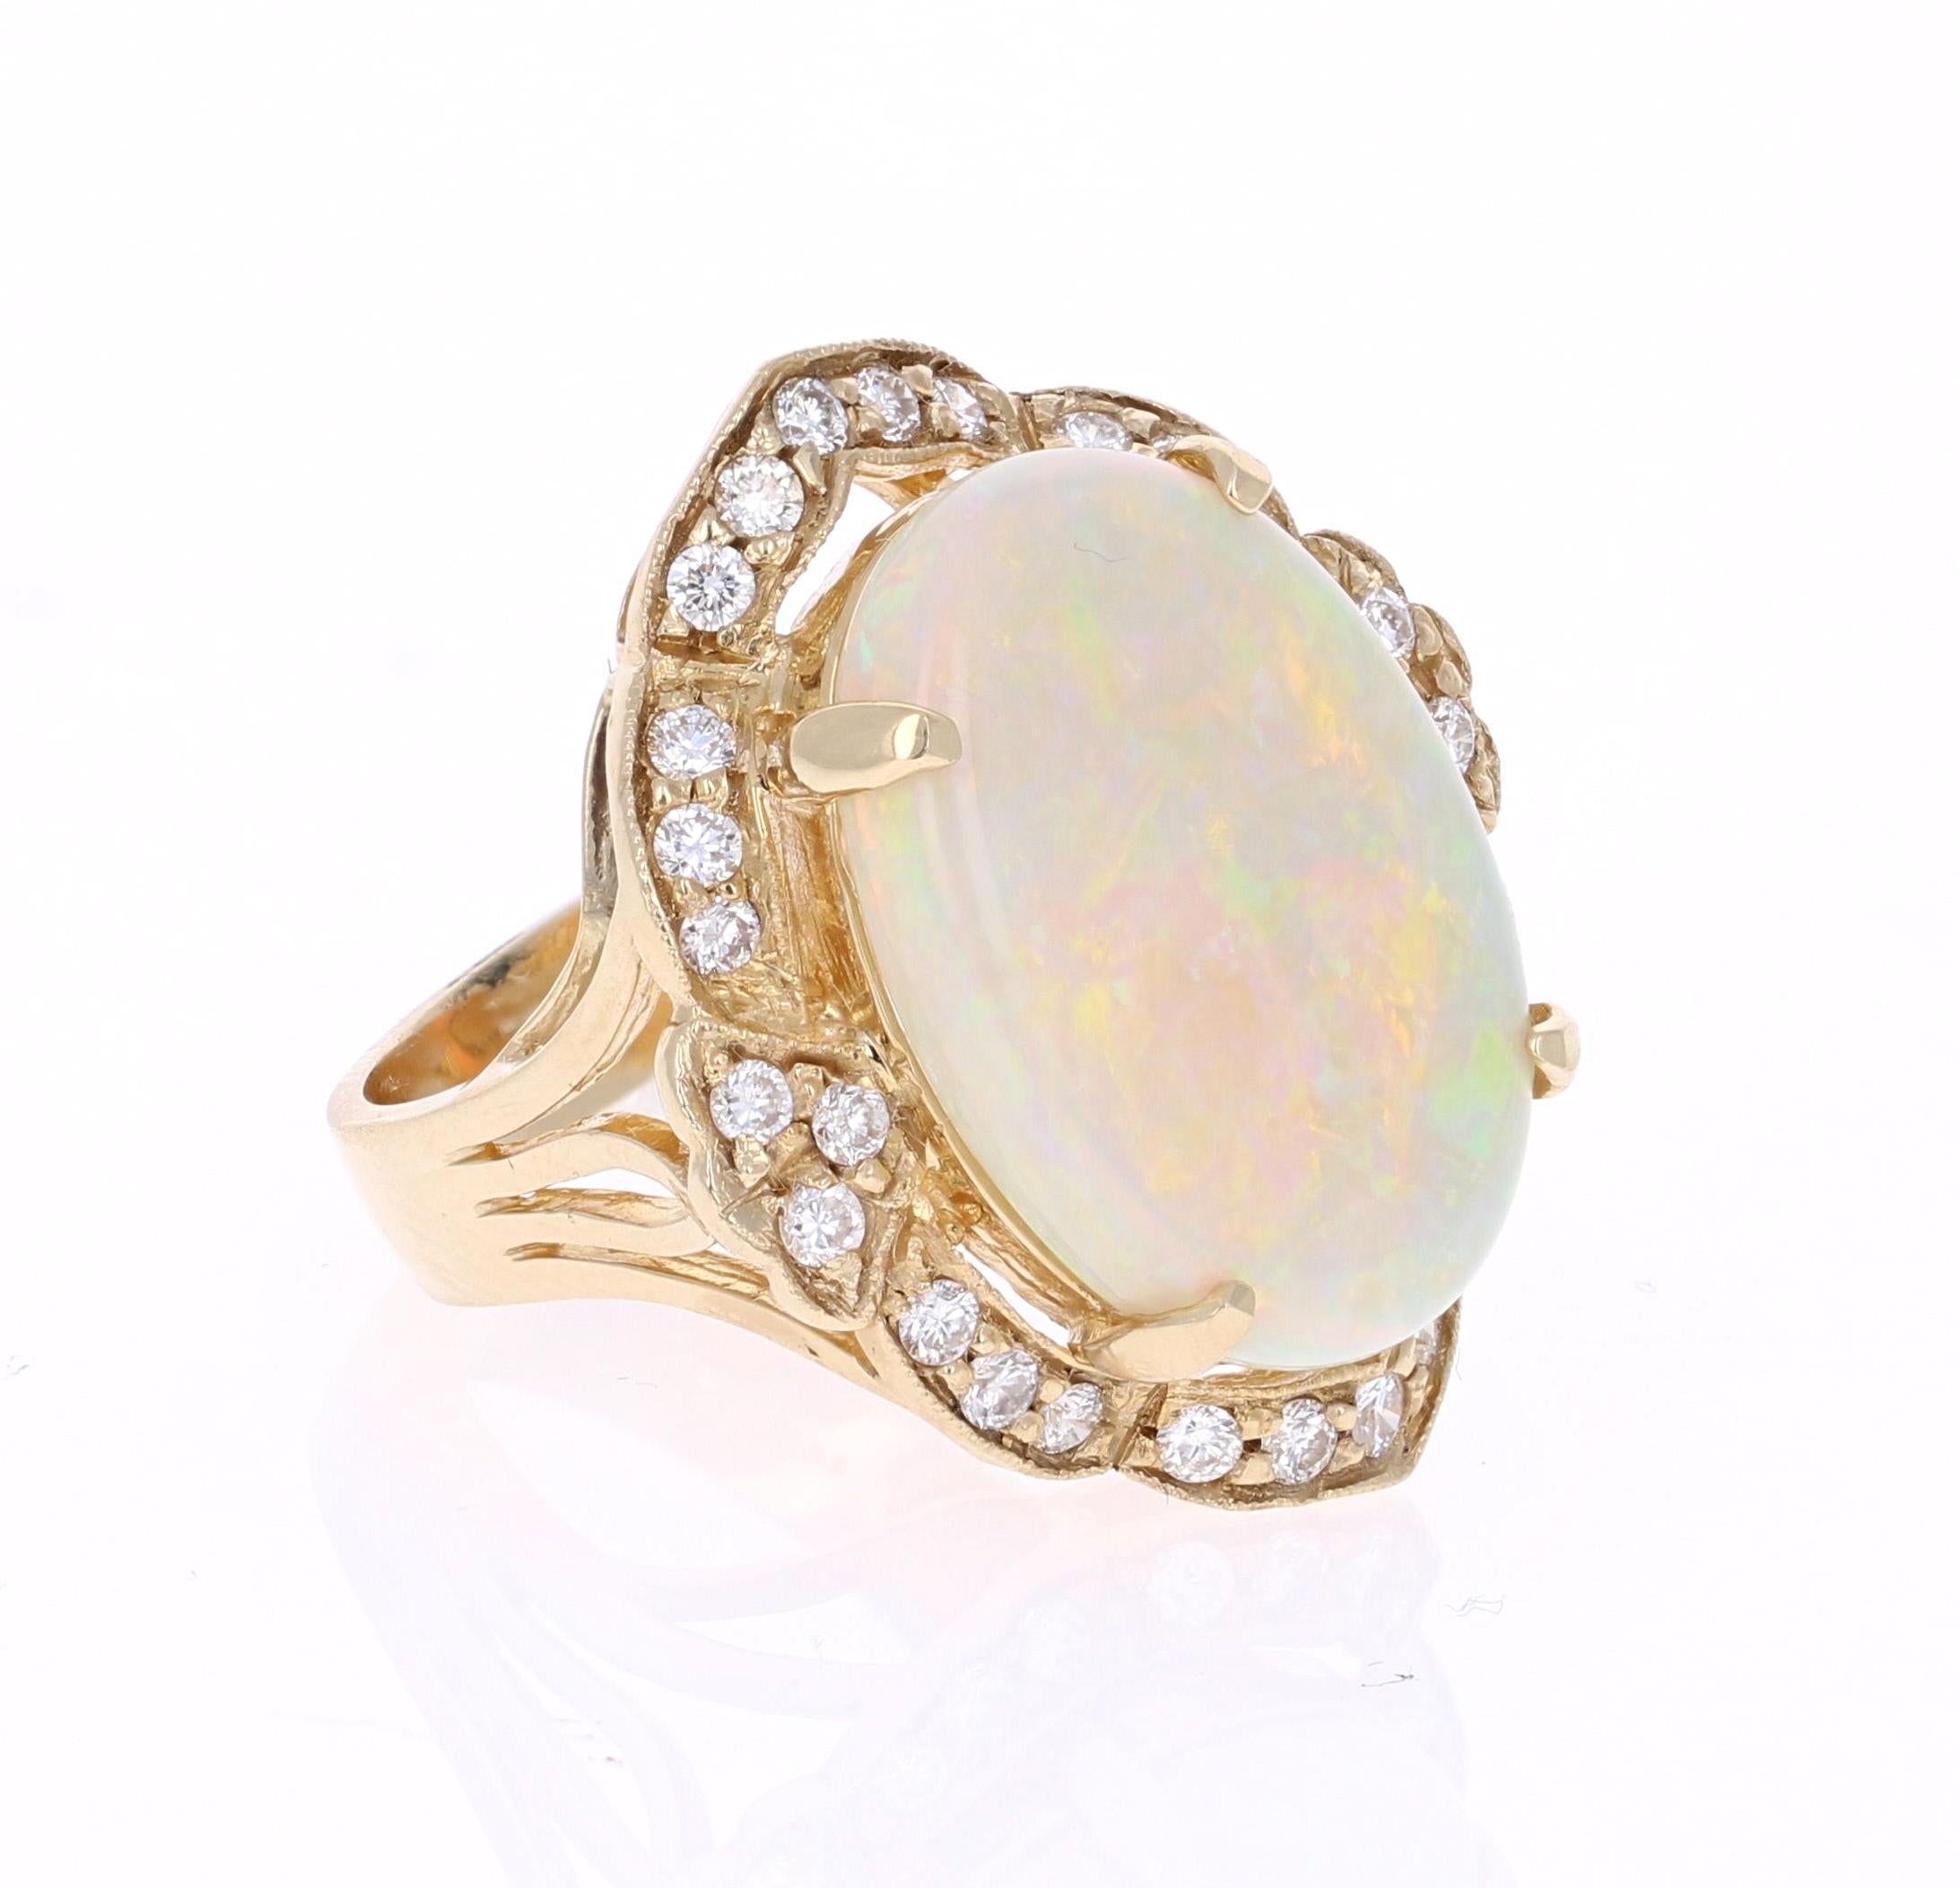 This ring has a 9.18 Carat Opal that is curated in a unique Victorian-Inspired setting 14 Karat Yellow Gold. The setting is adorned with 28 Round Cut Diamonds that weigh 0.84 Carats. The total carat weight of the ring is 9.93 Carats.

The Opal